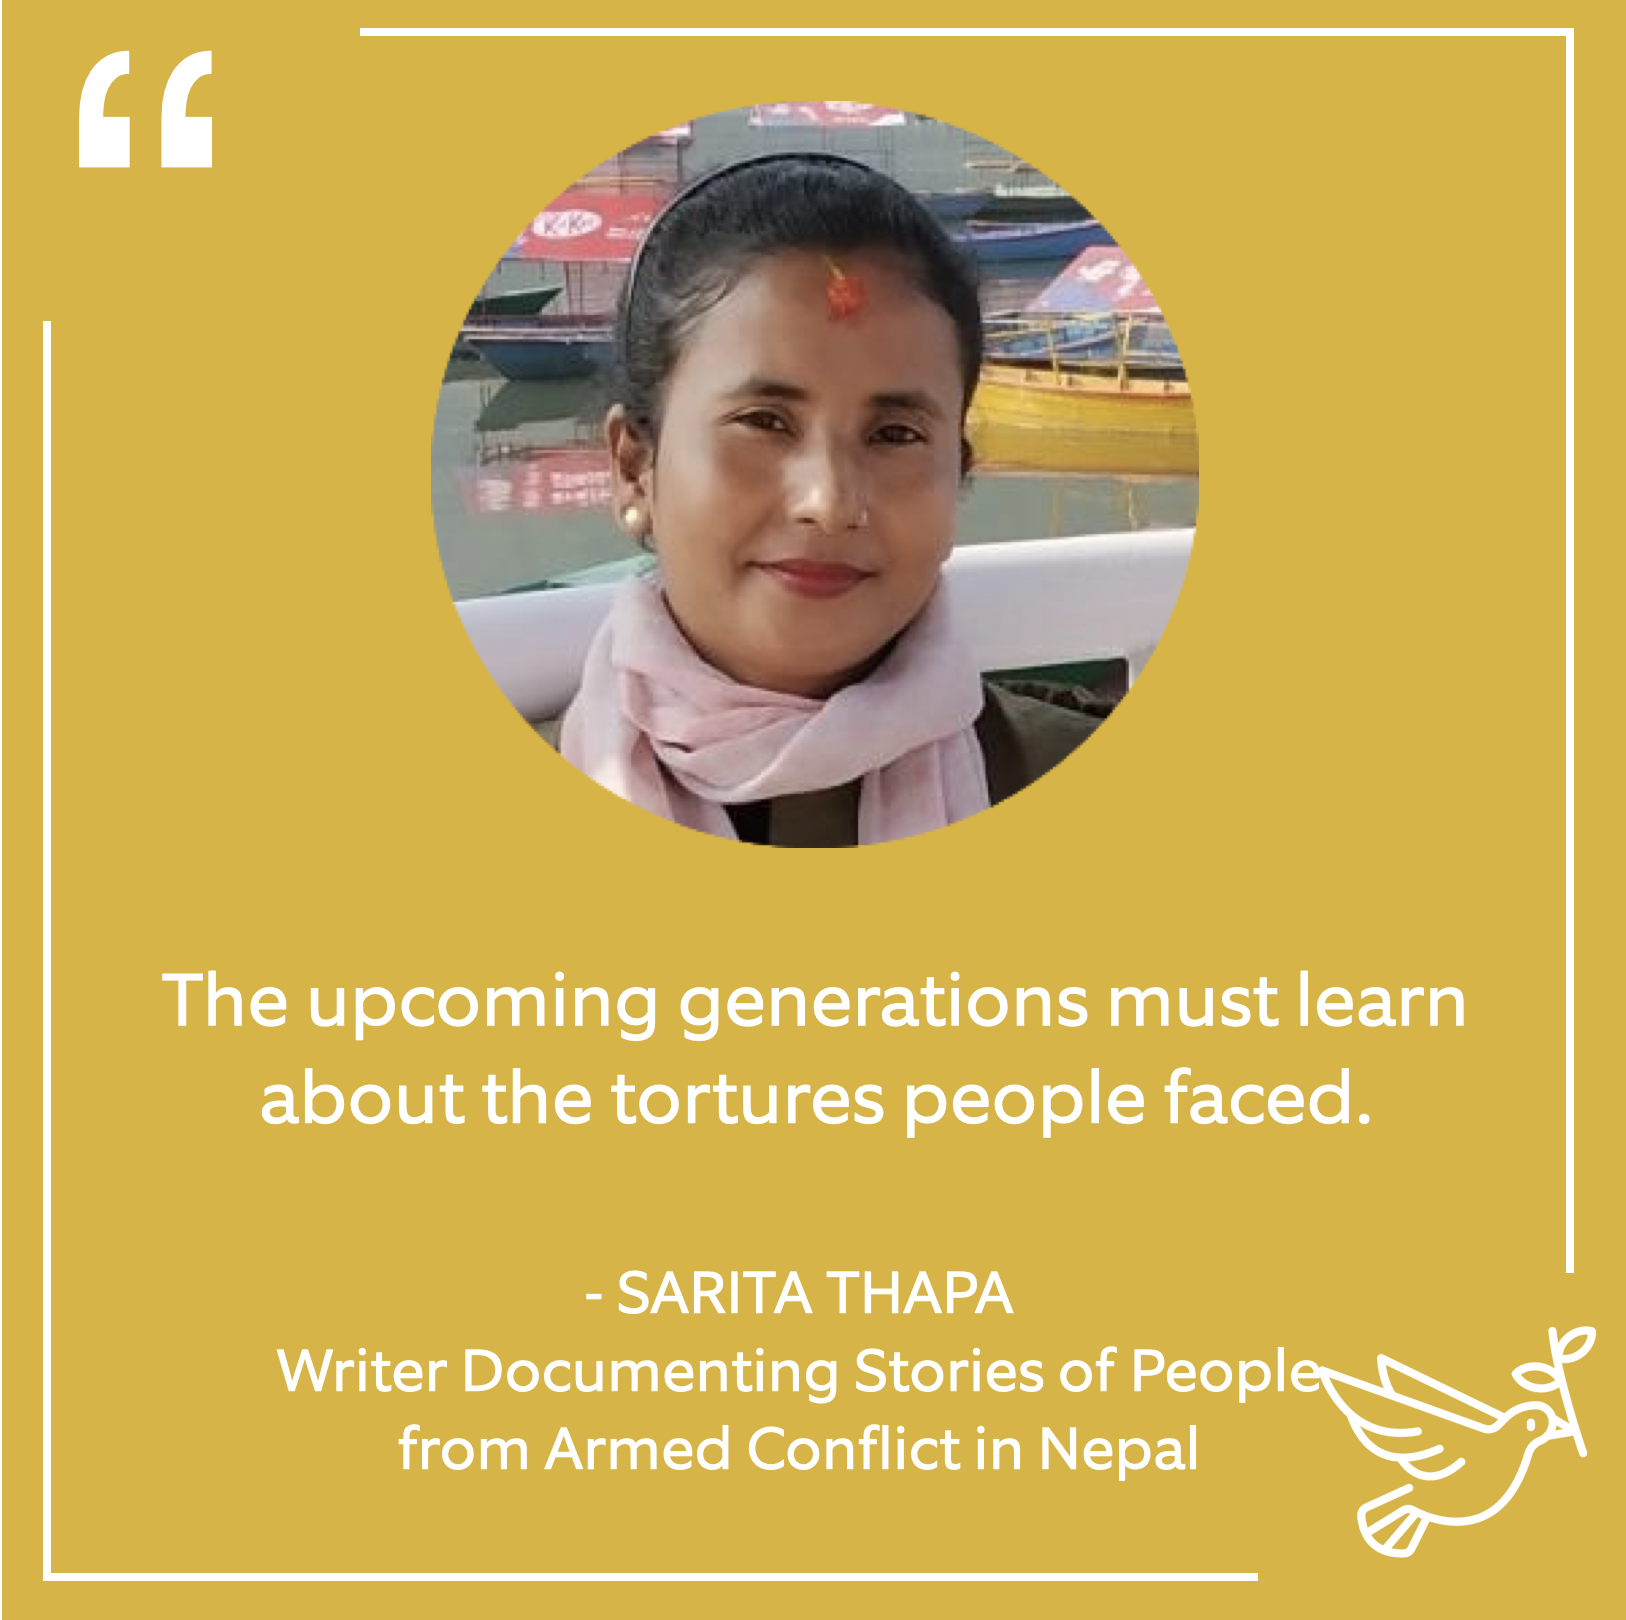 Sarita Thapa - Writer Documenting Stories of People from the Armed Conflict in Nepal 